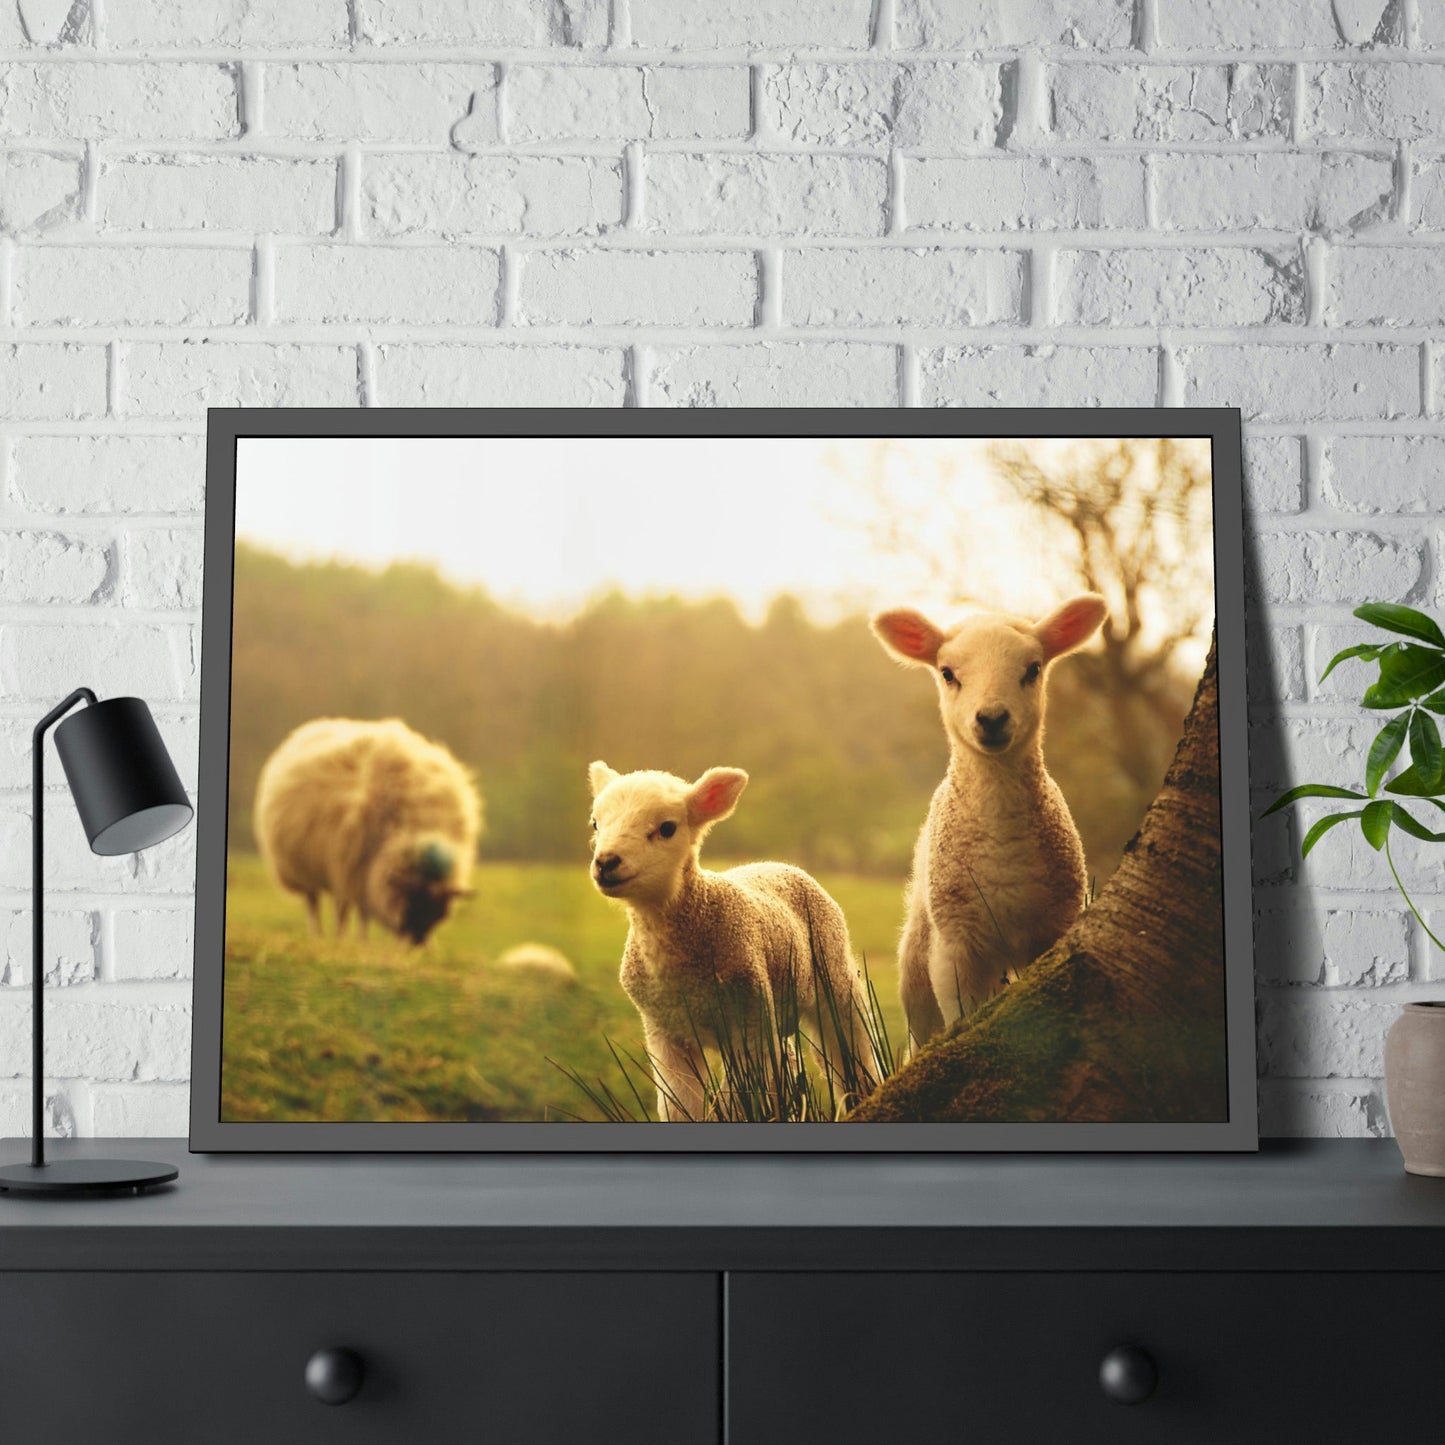 Rustic Charm: Framed Poster & Canvas of Sheep Grazing